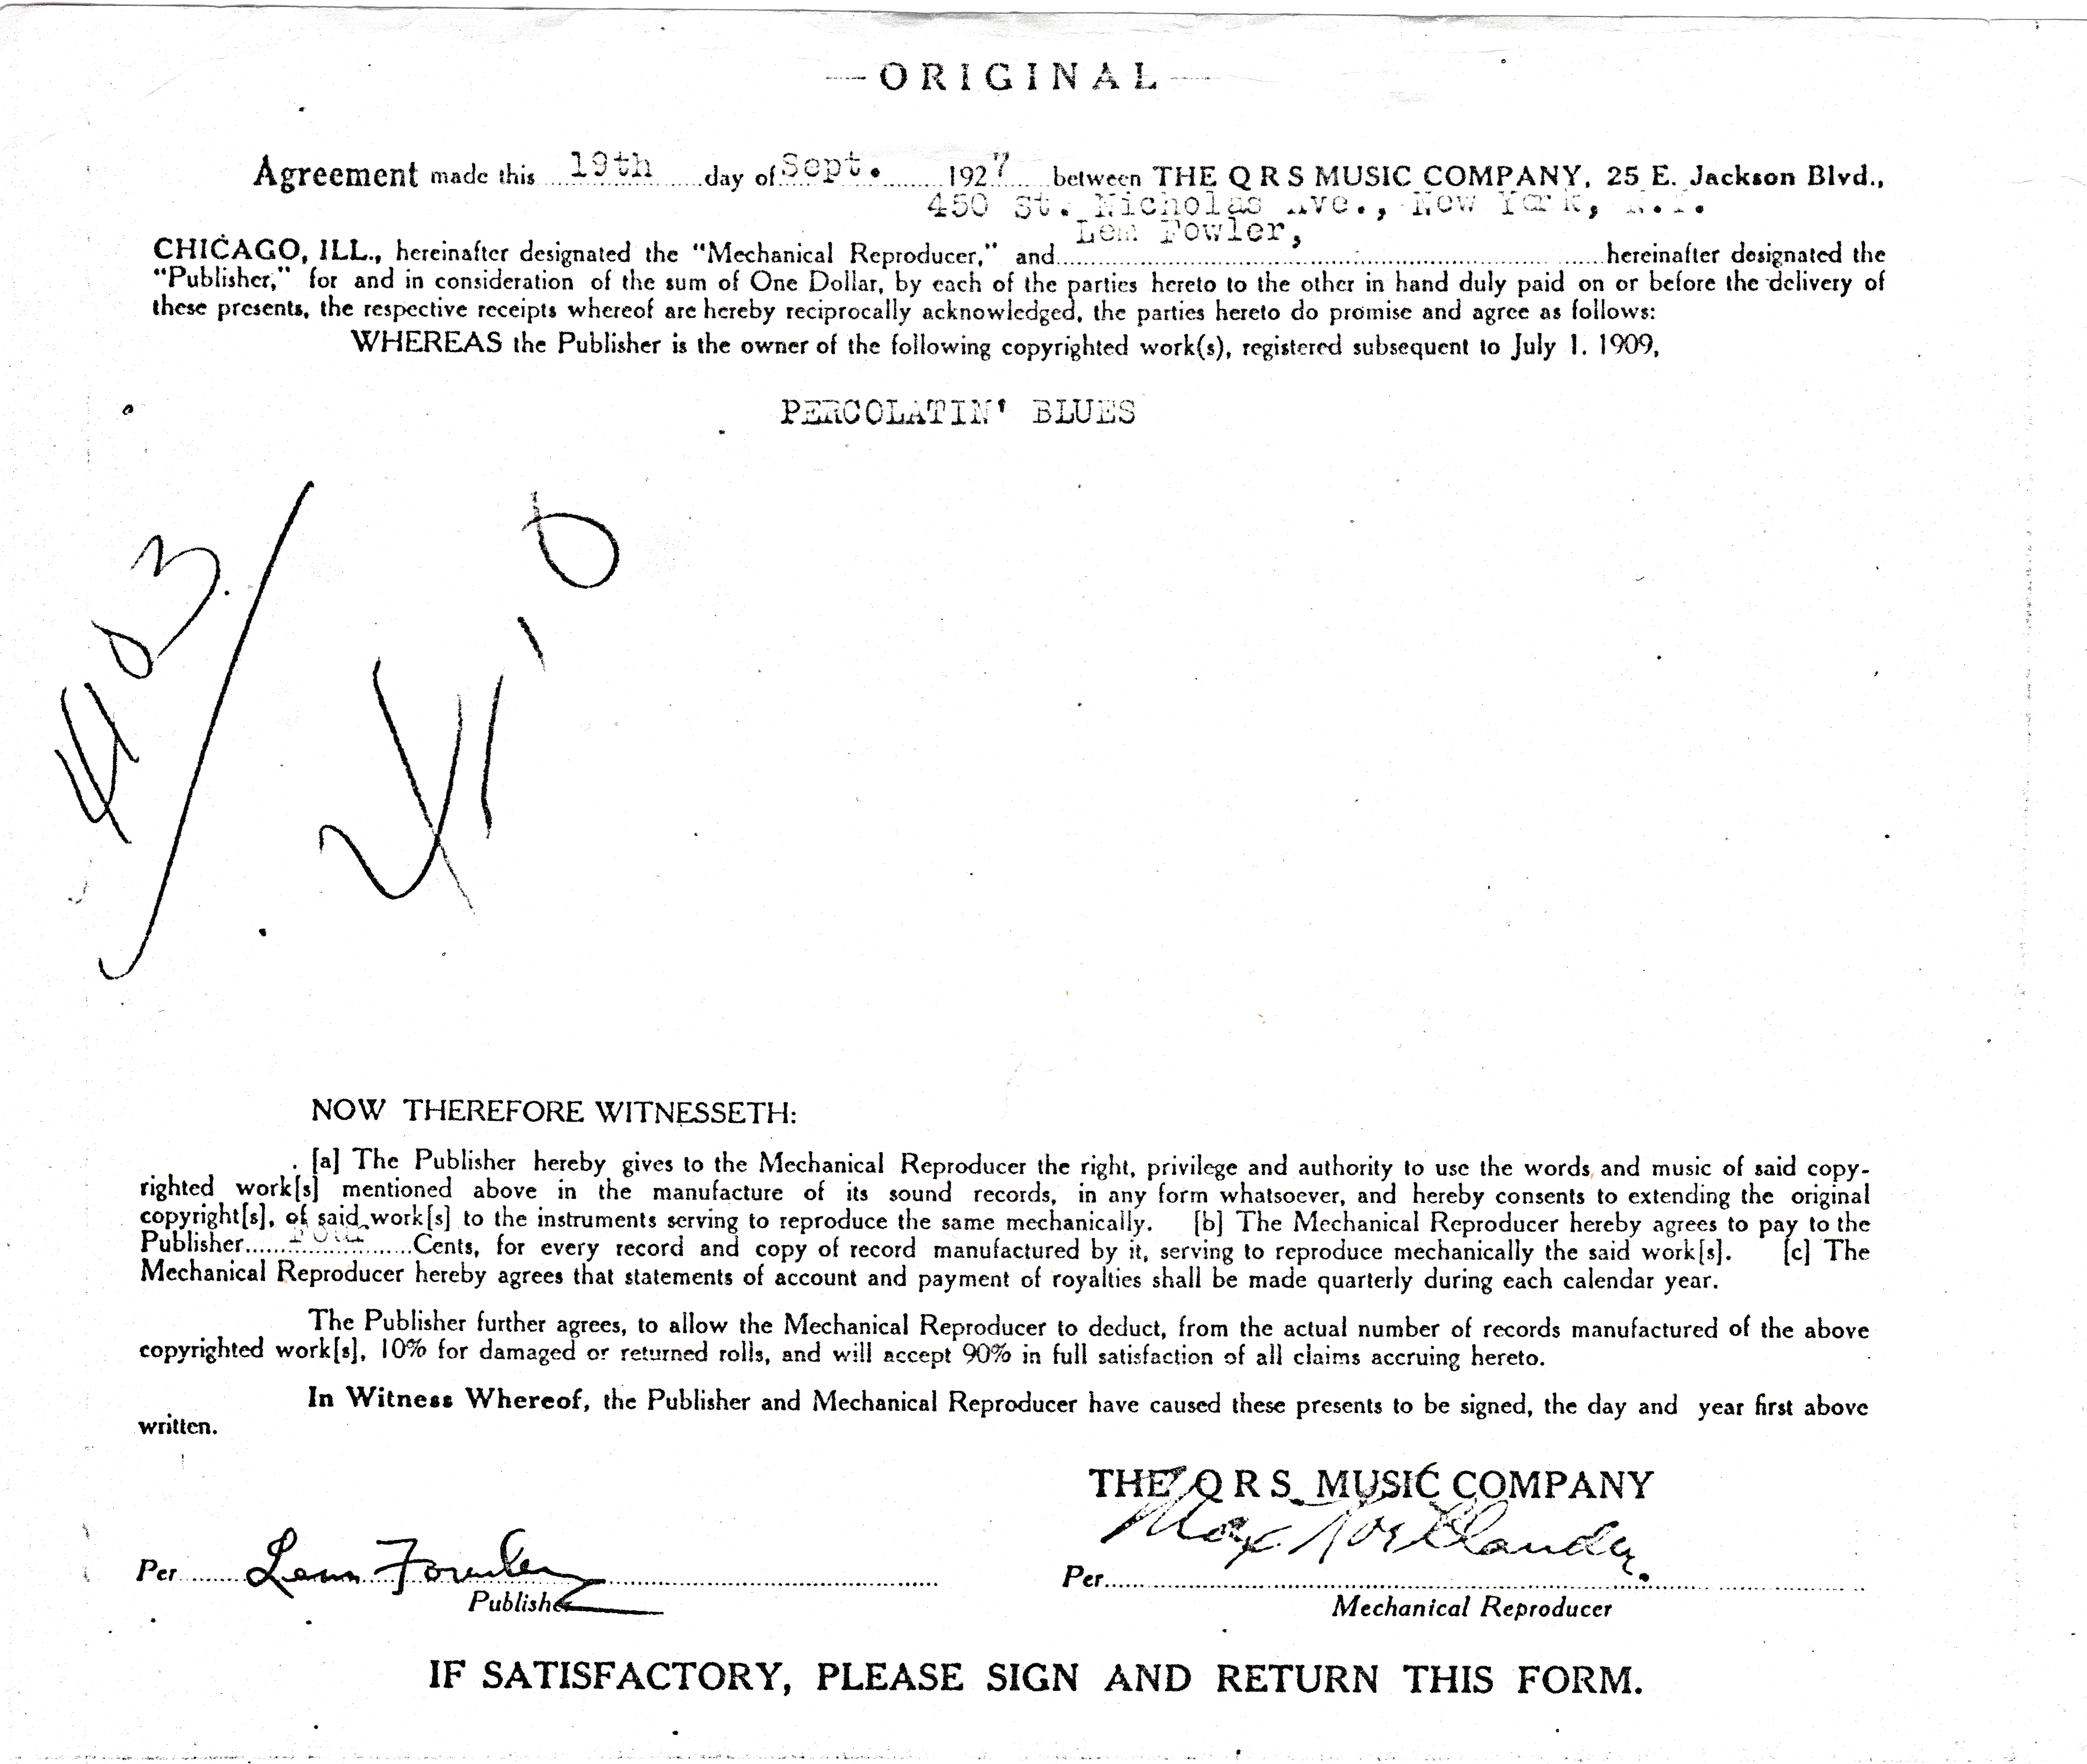 Contract between QRS and Fowler for mechanical rights to 'Percolatin' Blues', September 1927